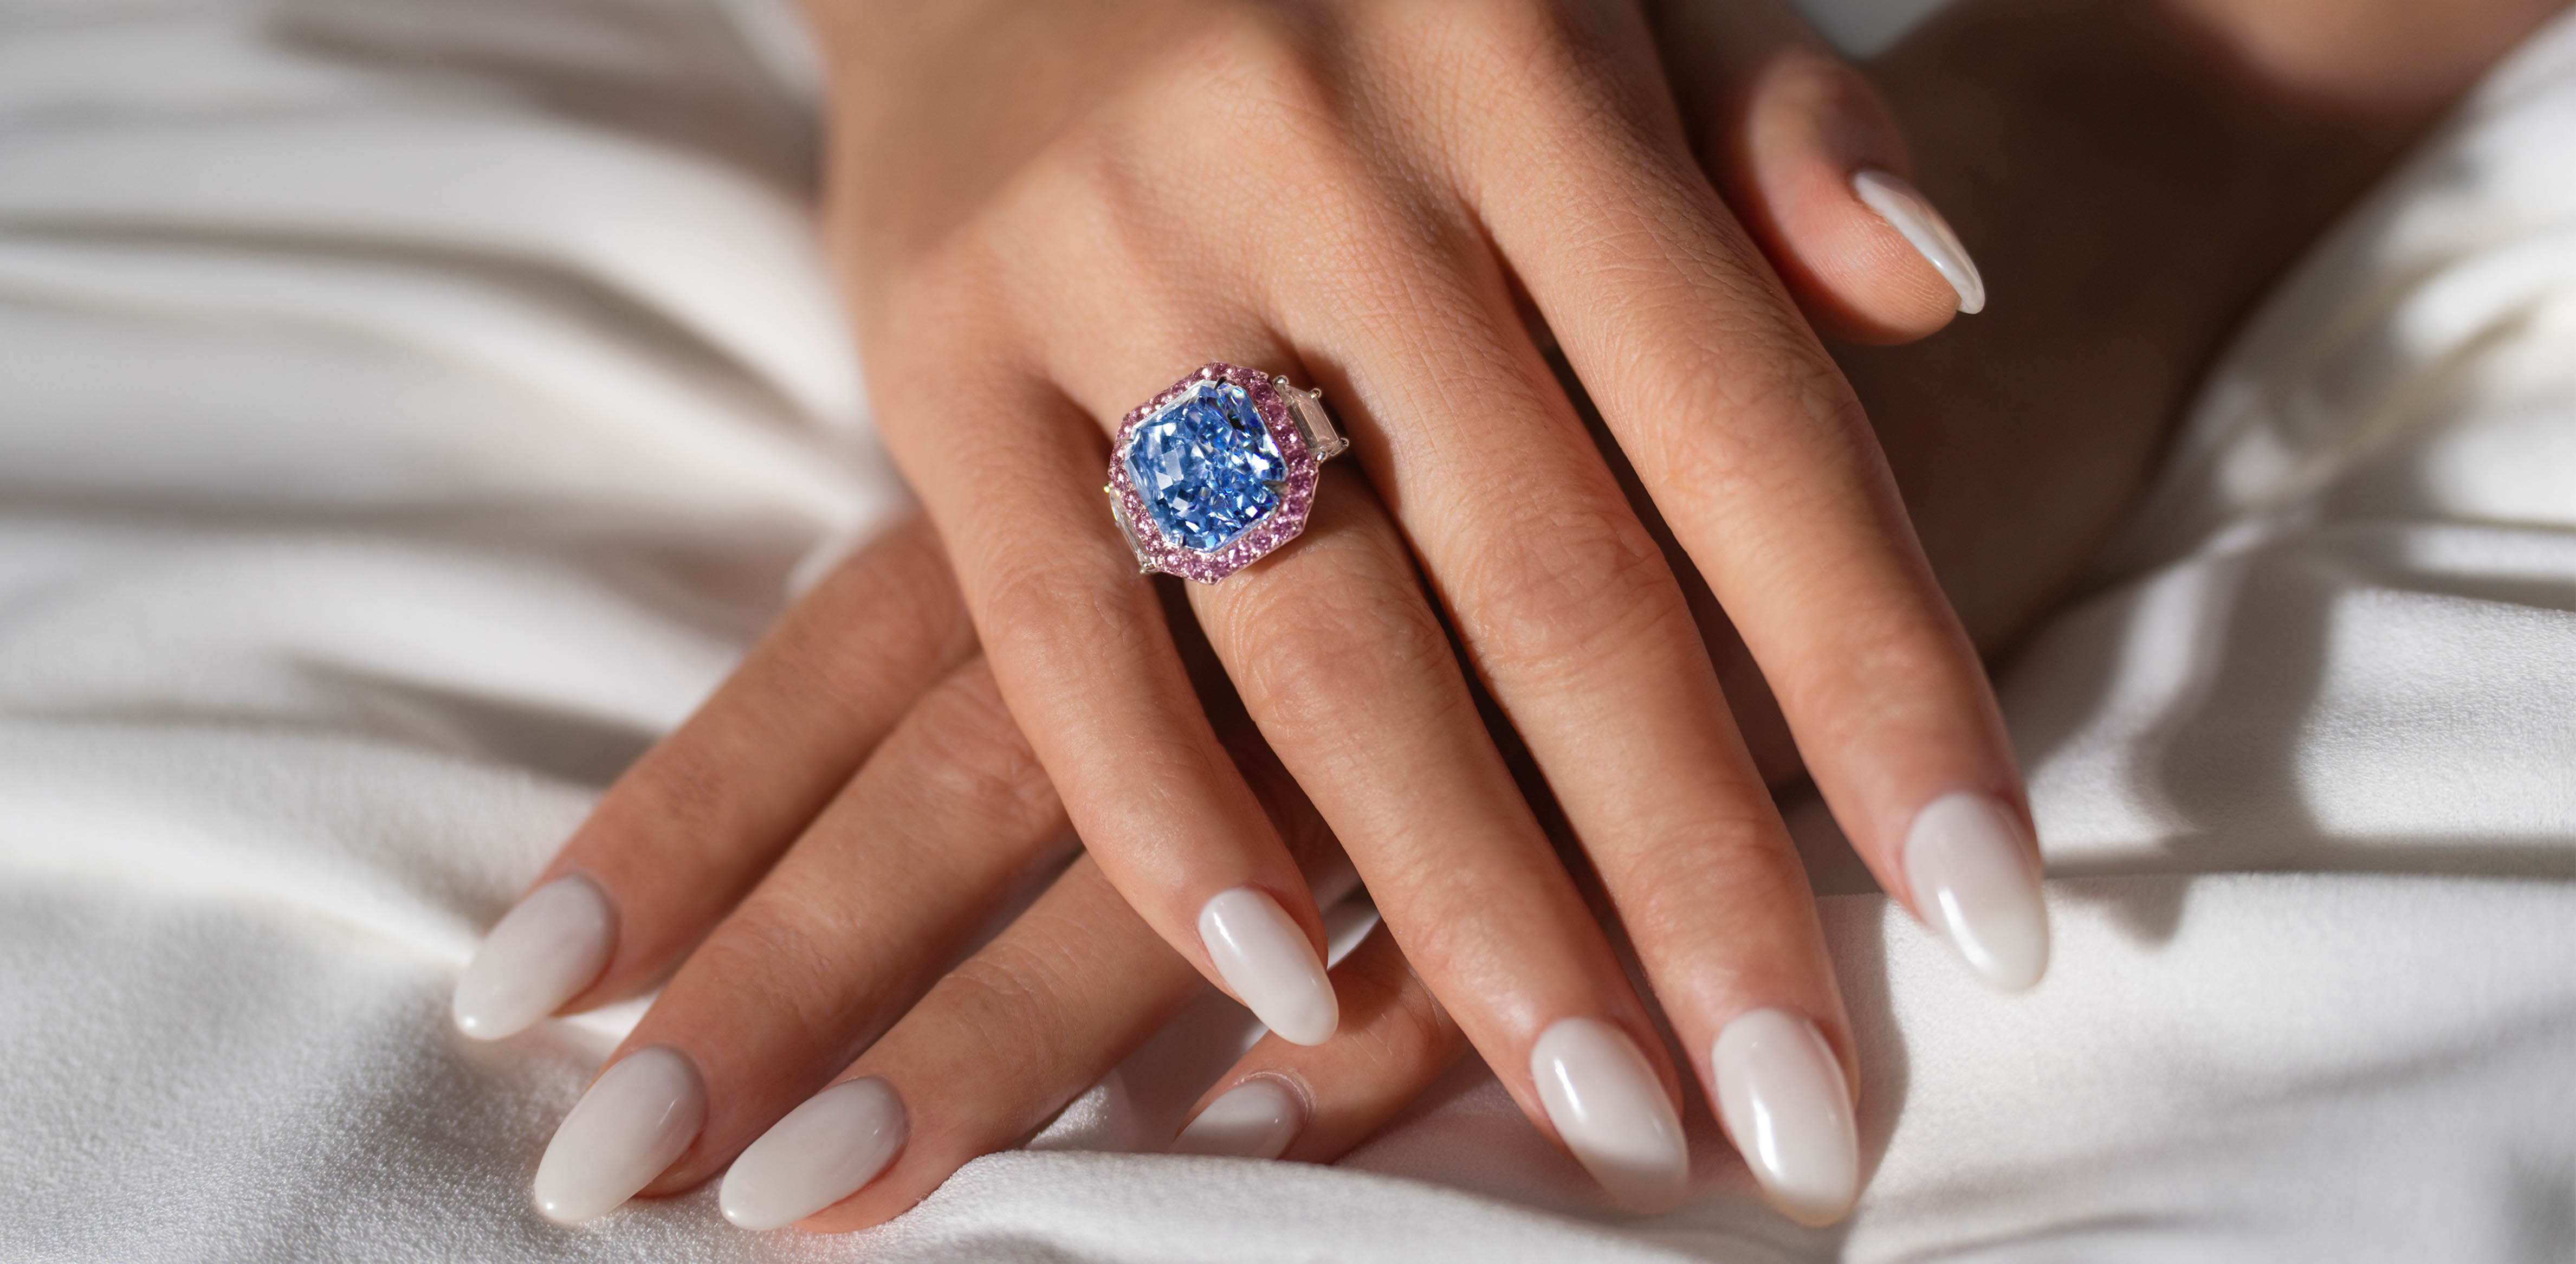 Sotheby's Has Revealed 'The Infinite Blue' Diamond - Only Natural